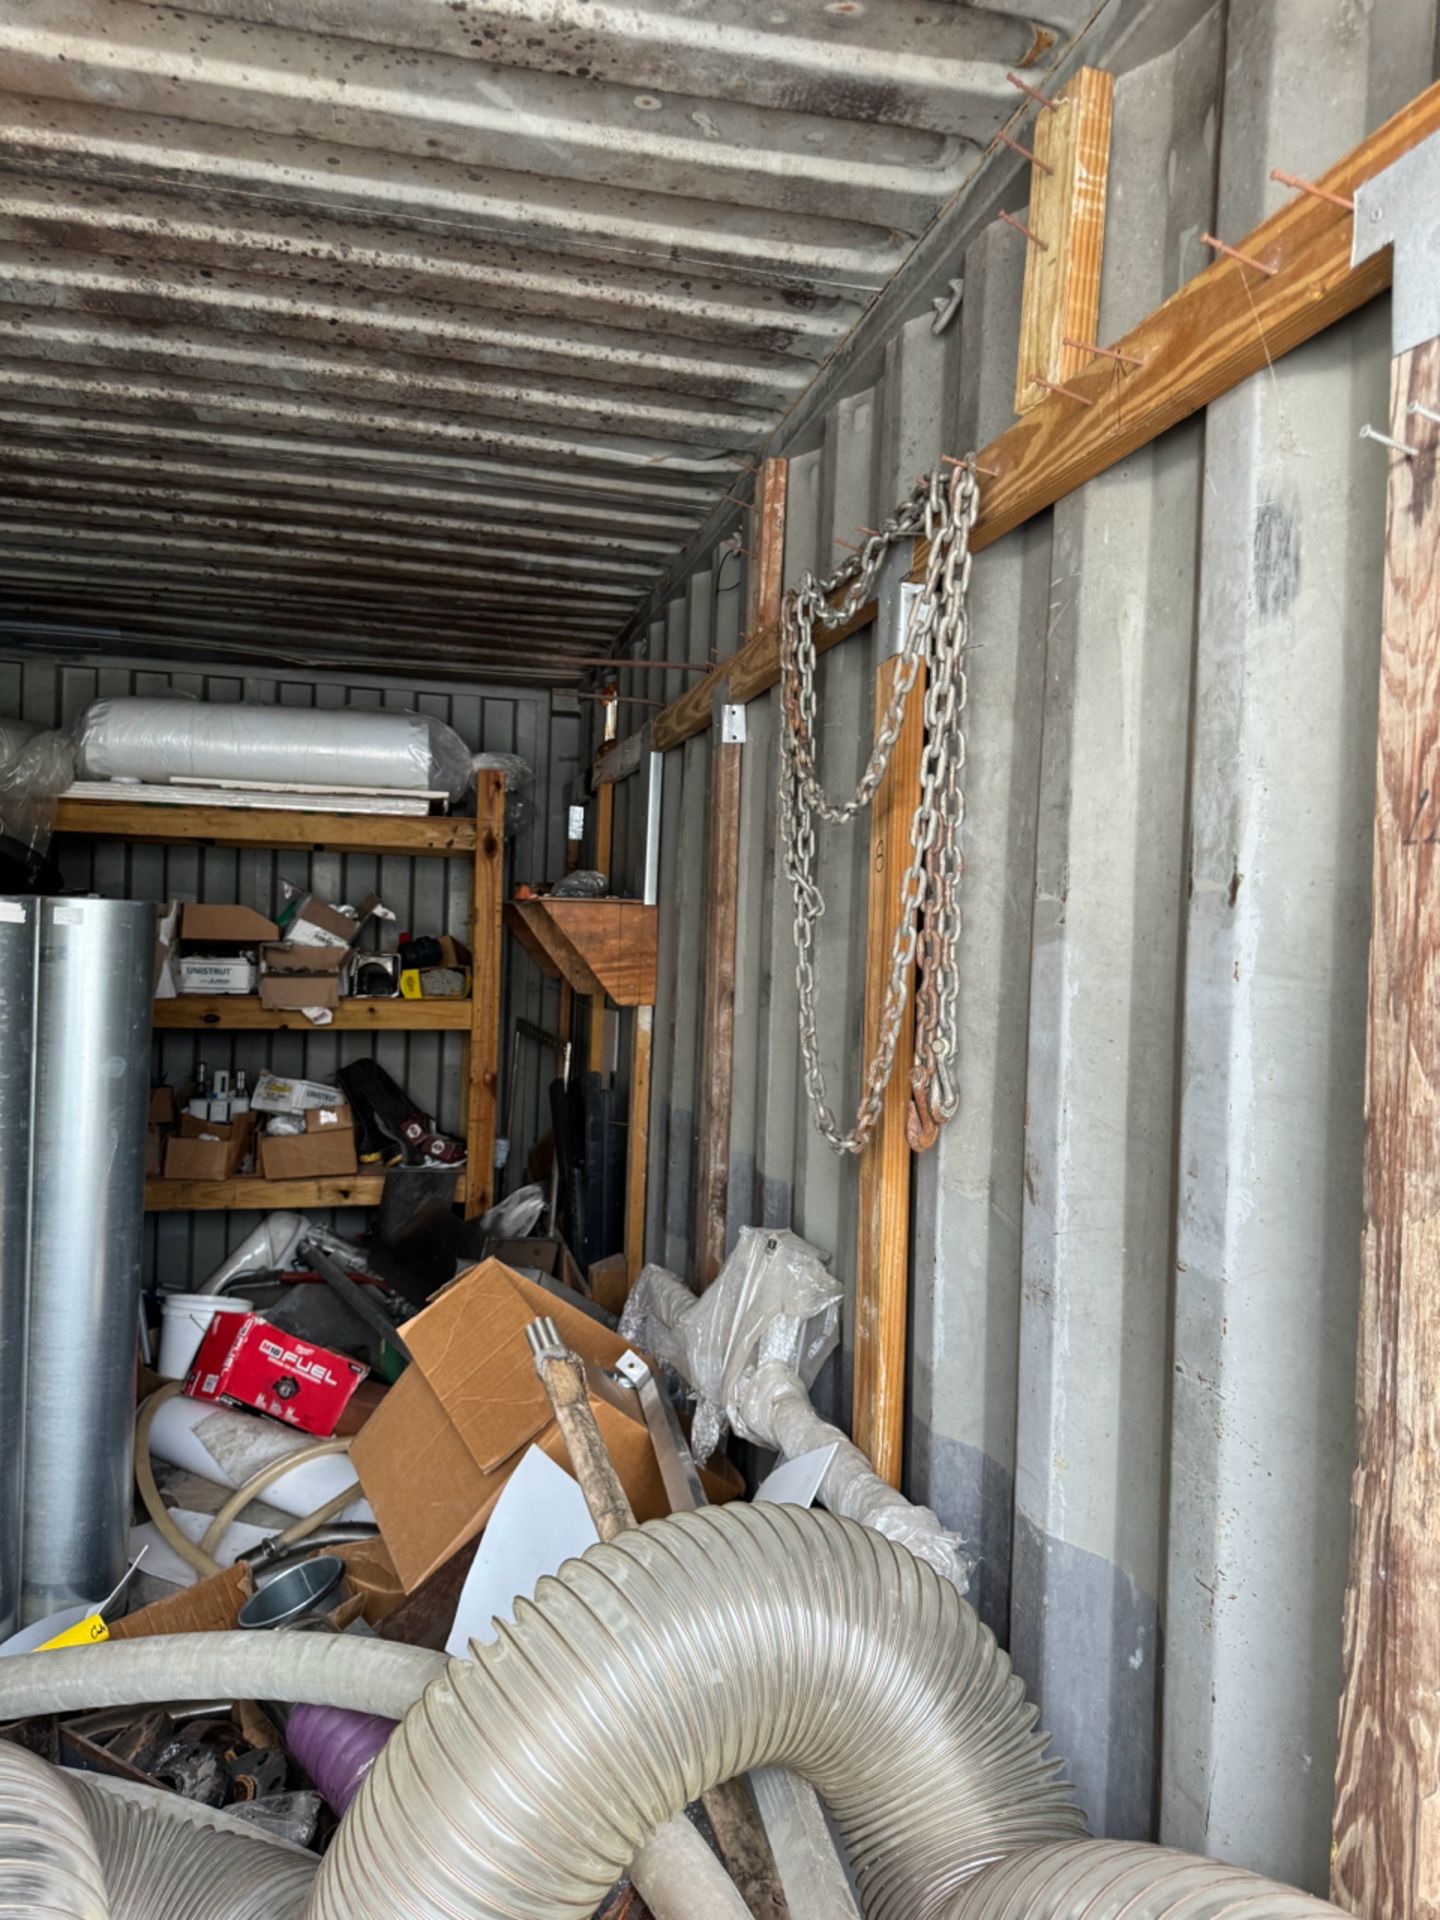 Lot 20' Shipping Container w/ Contents - Image 20 of 20